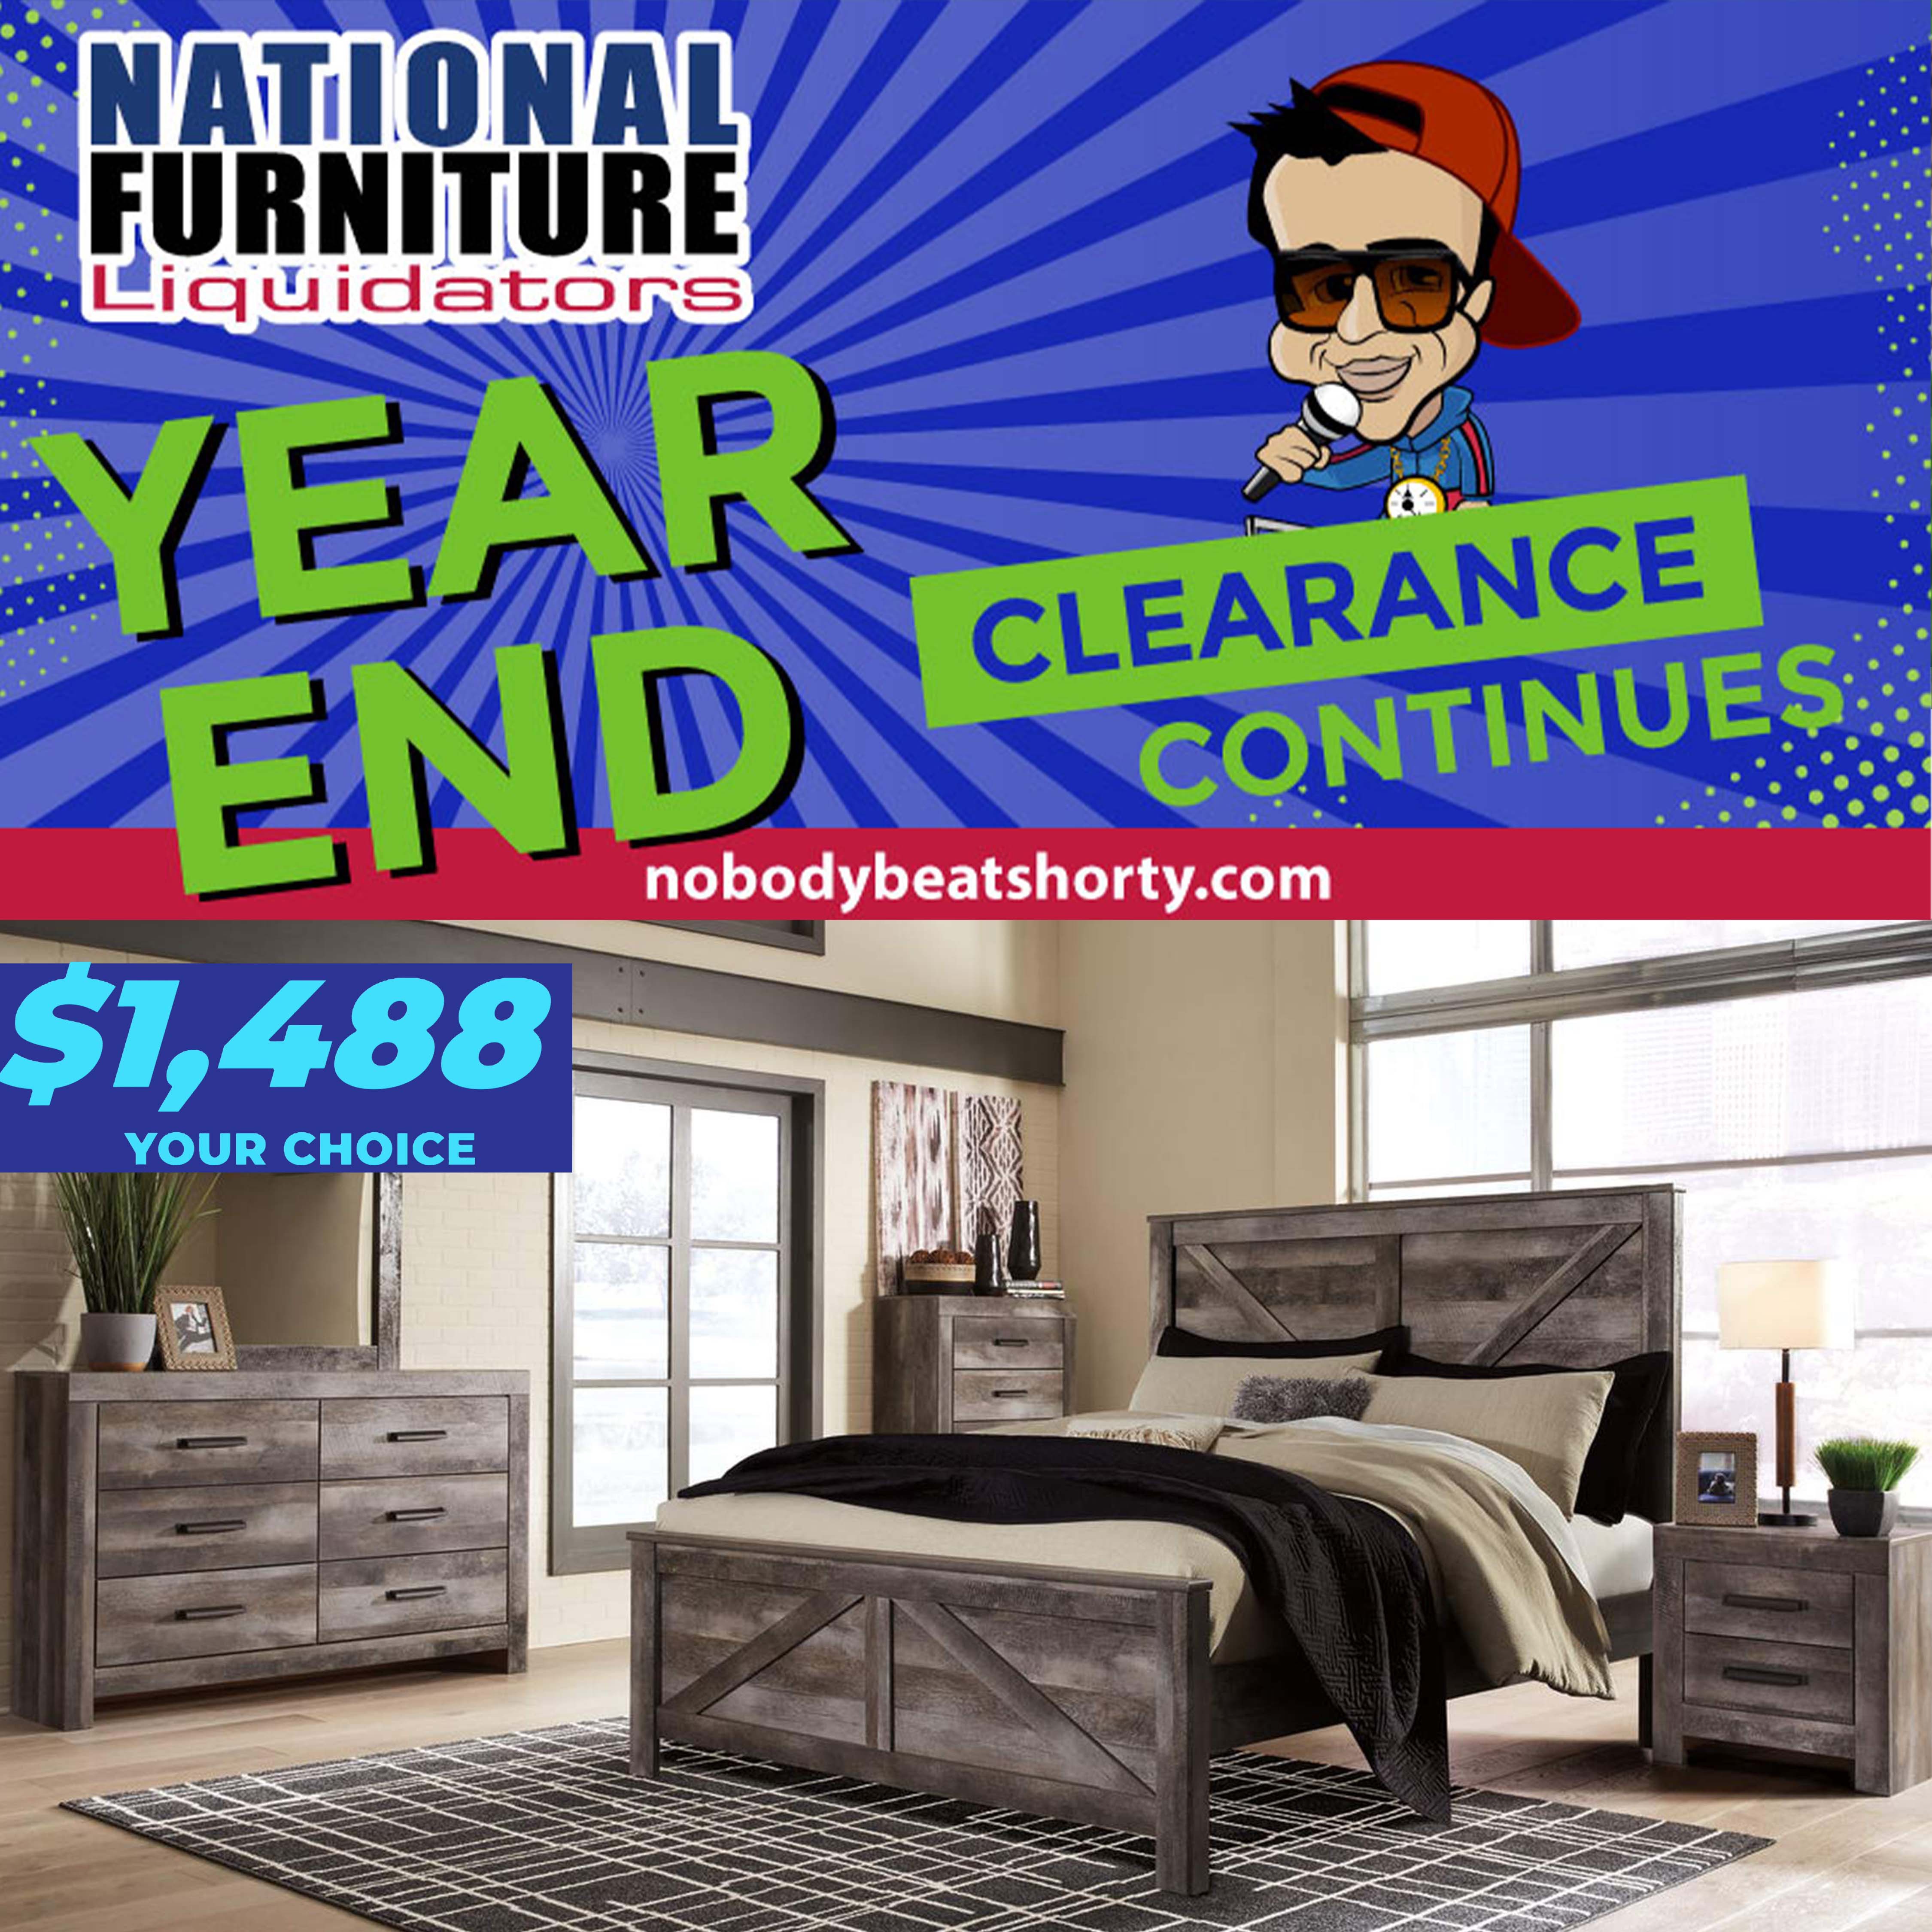 Kickstart 2024 with National Furniture Liquidators' Extended Year-End Clearance Sale in El Paso